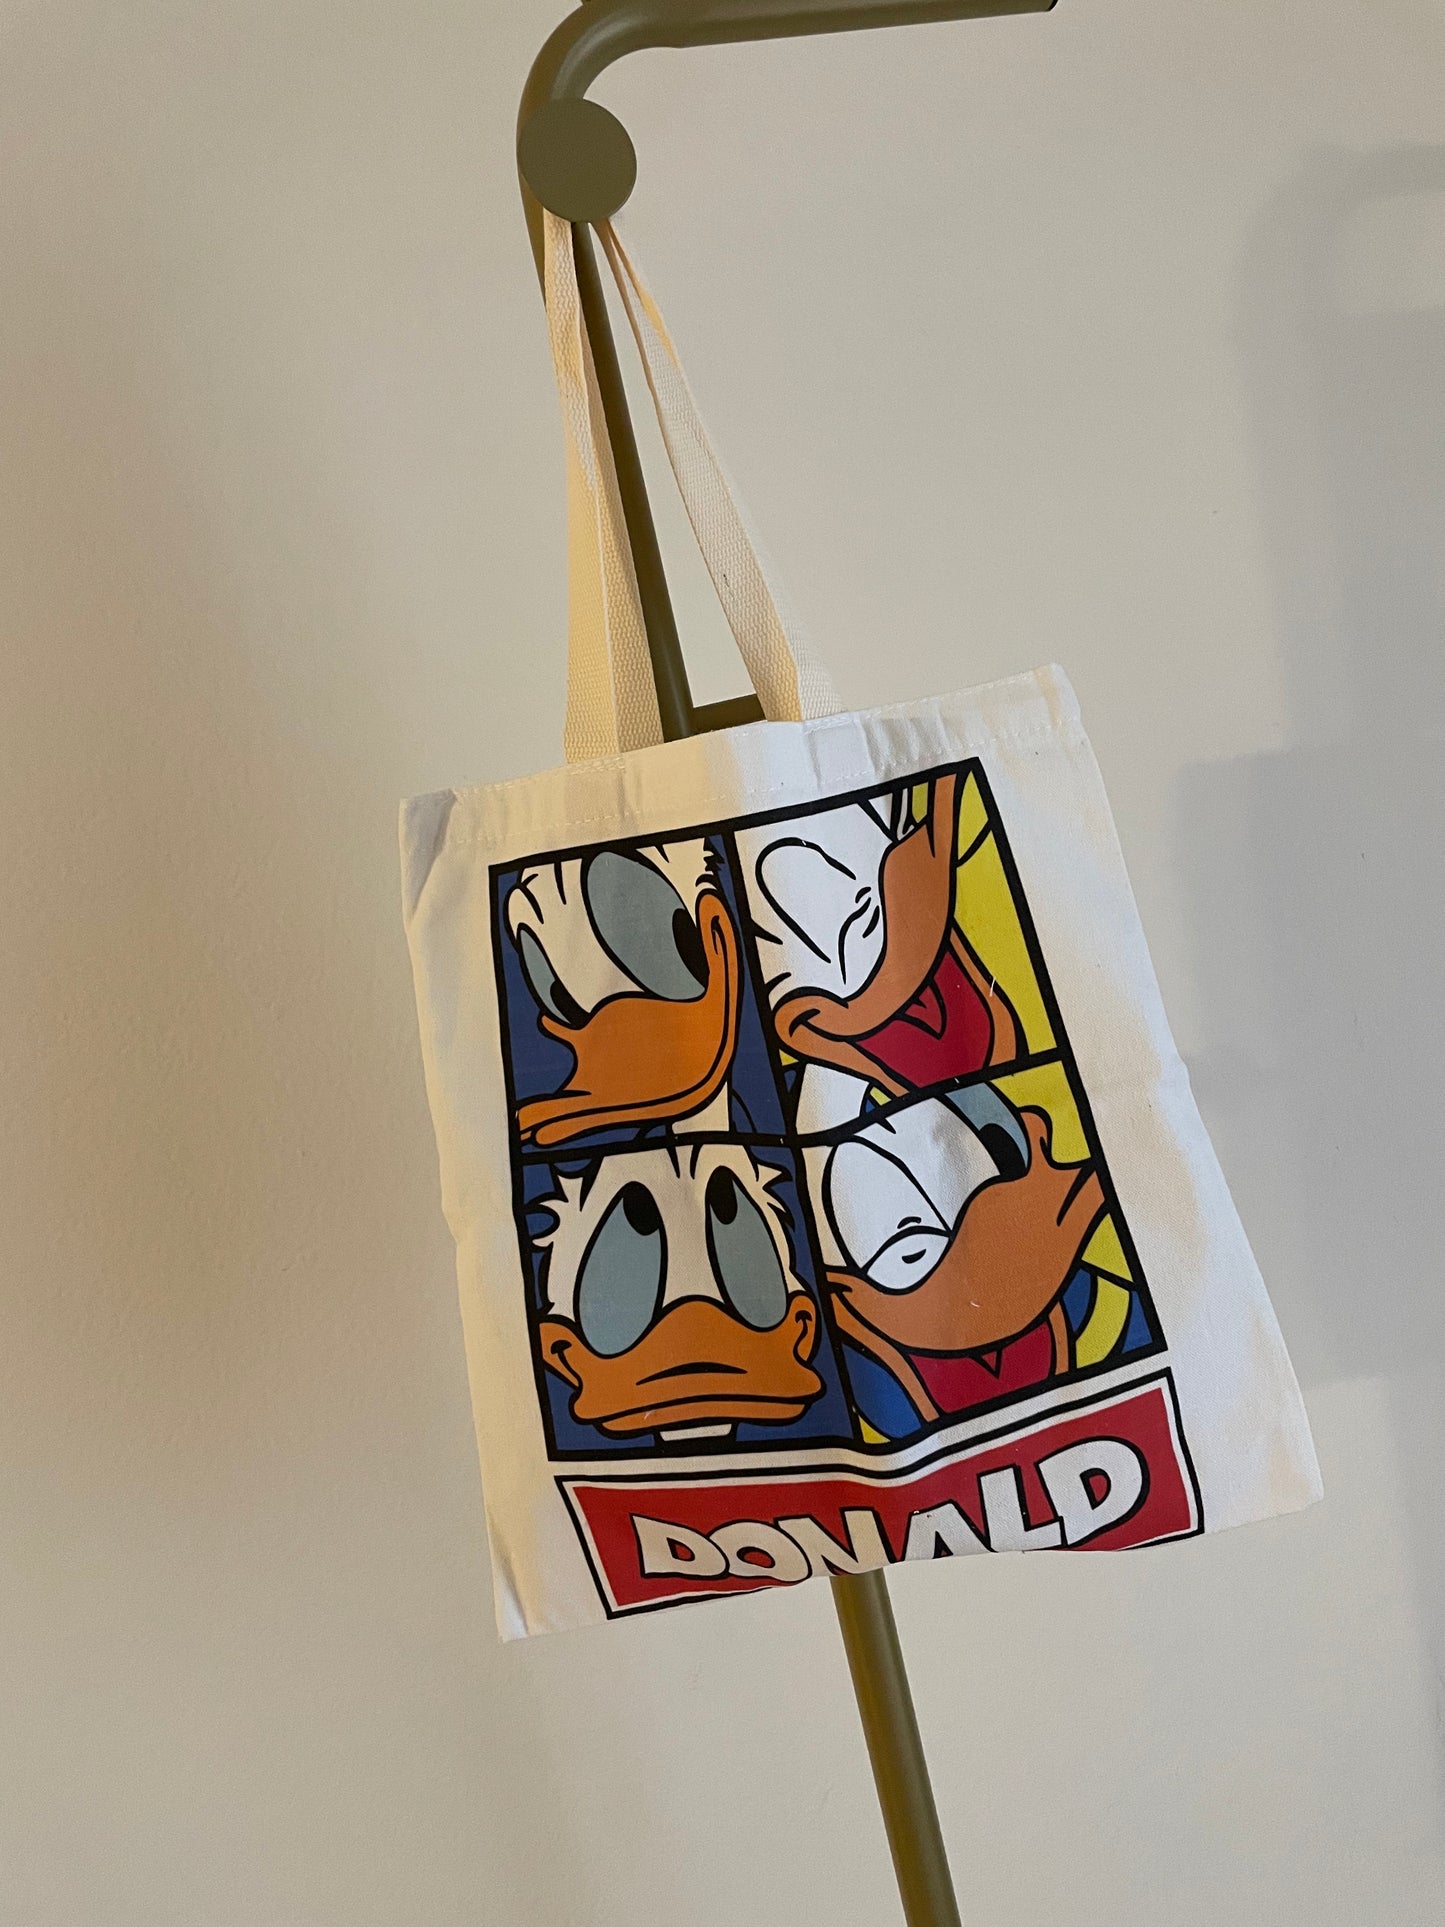 Cute ♥ Disney Mickey Mouse Tote Bags